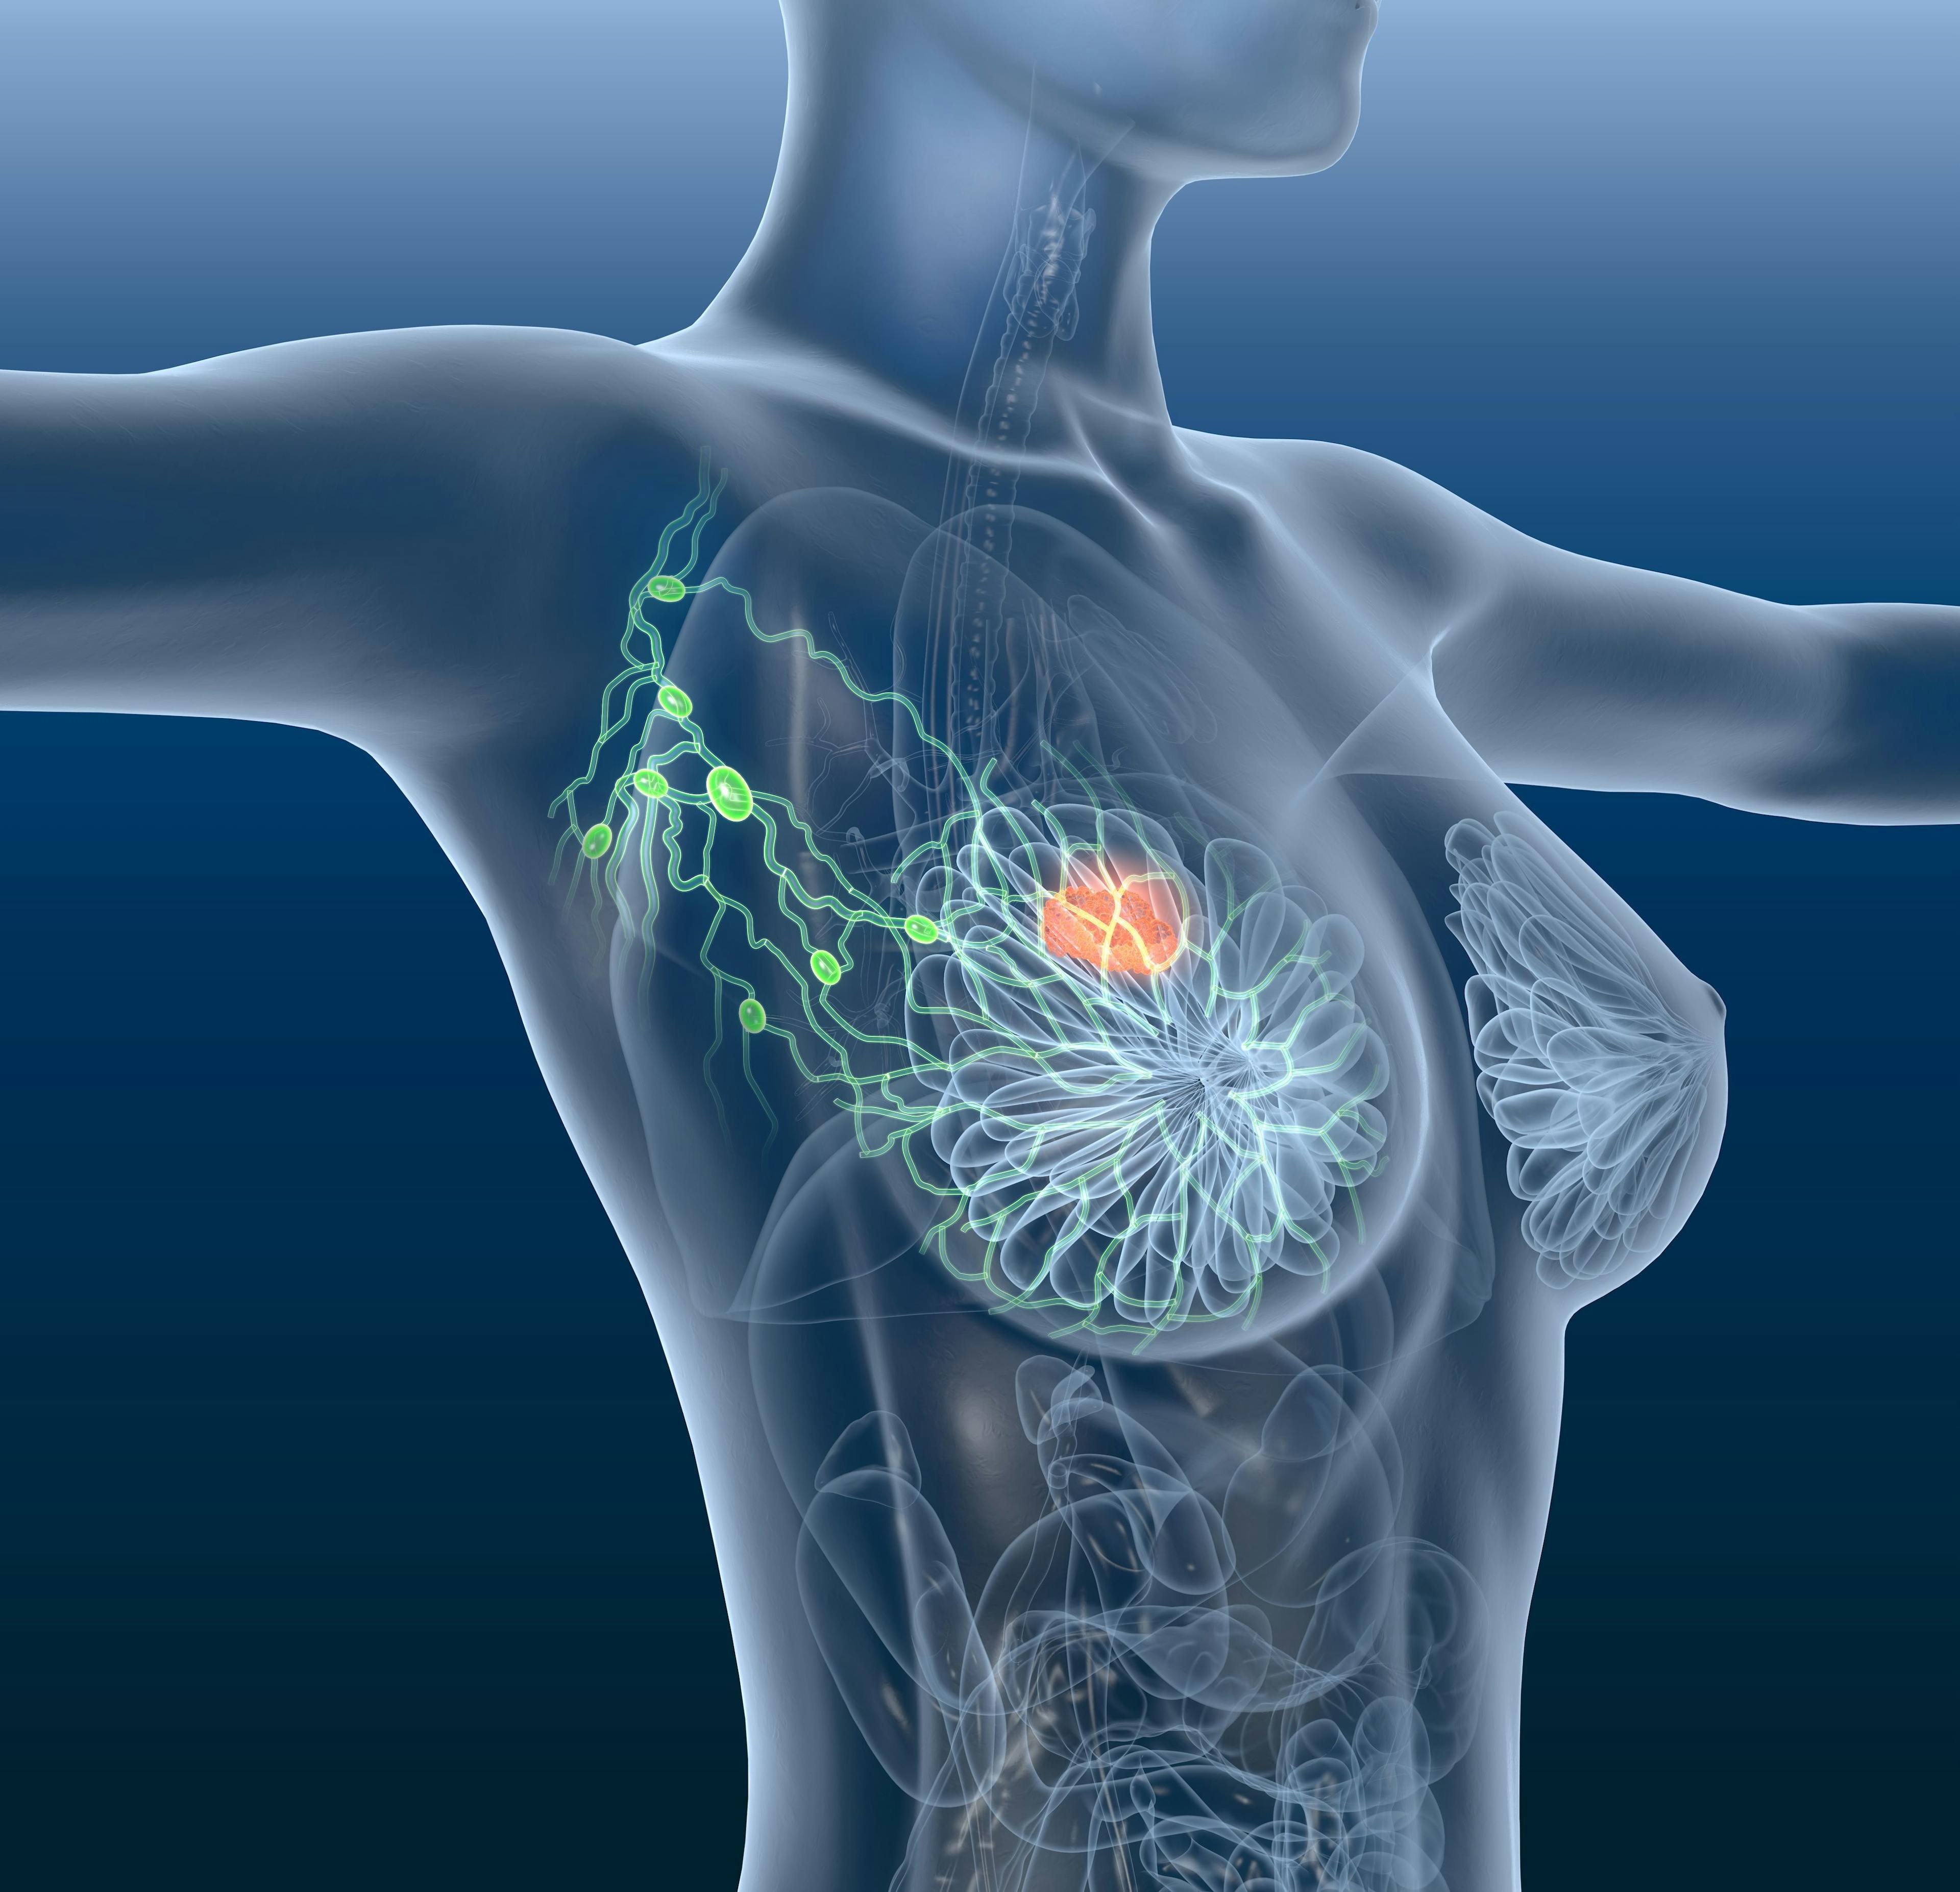 Understanding Radiation Therapy as a Patient with Breast Cancer